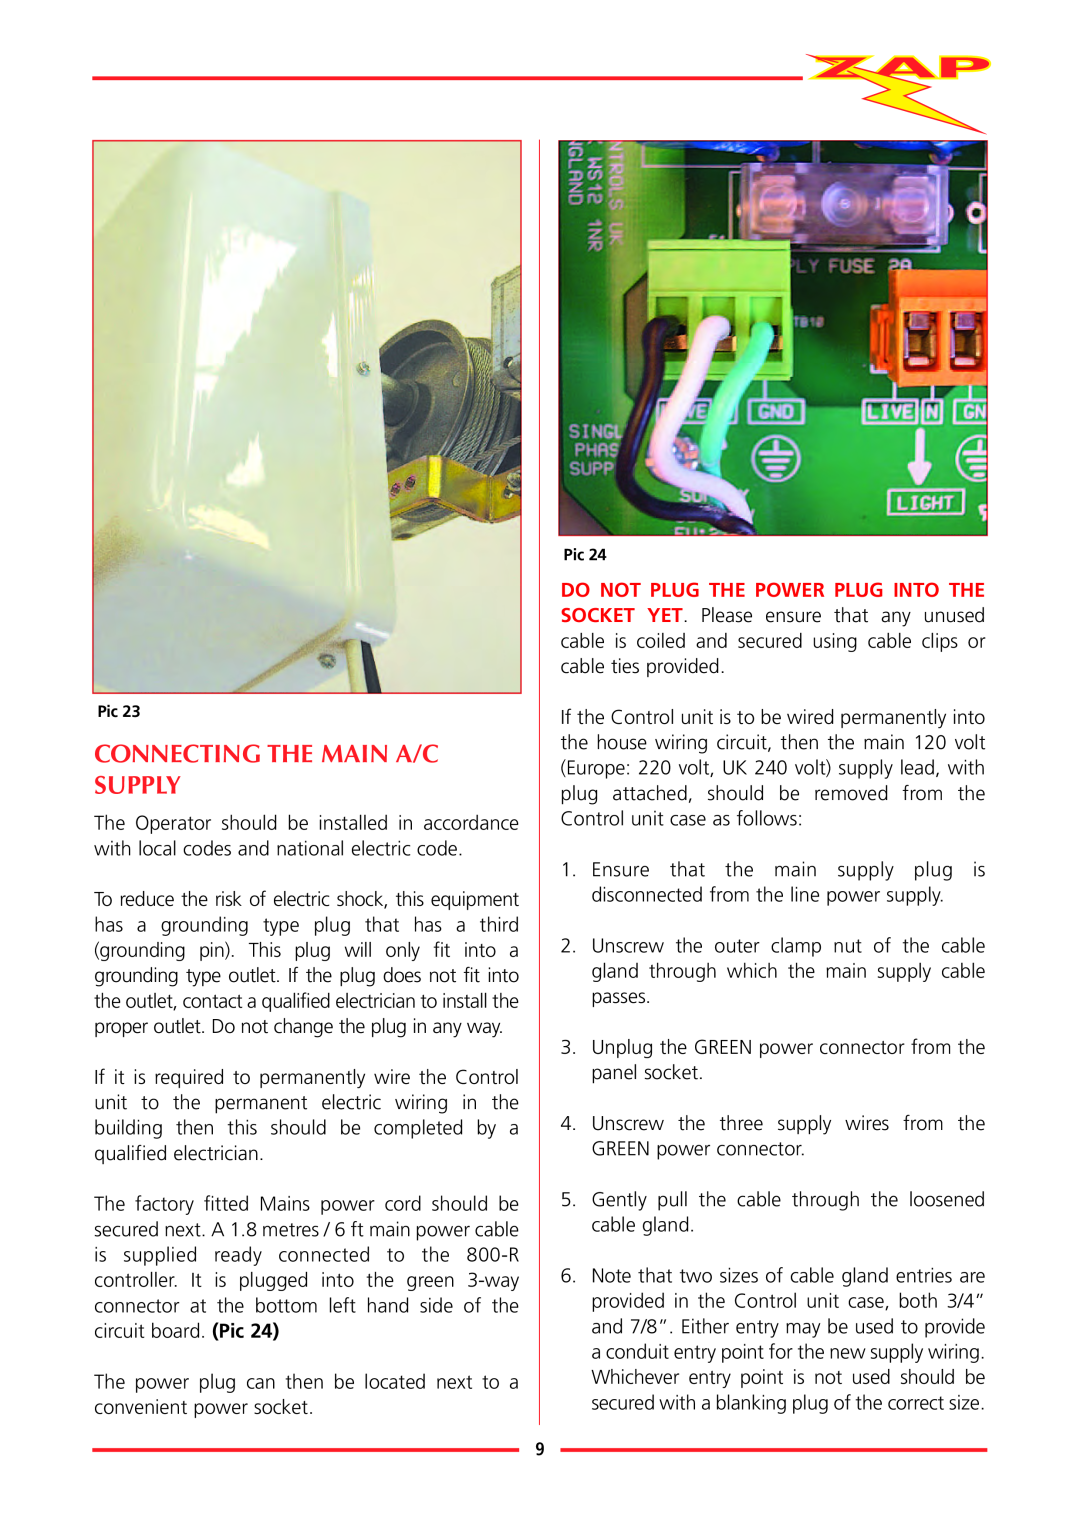 Zap 815-RL installation instructions Connecting The Main A/C Supply, Do Not Plug The Power Plug Into The 